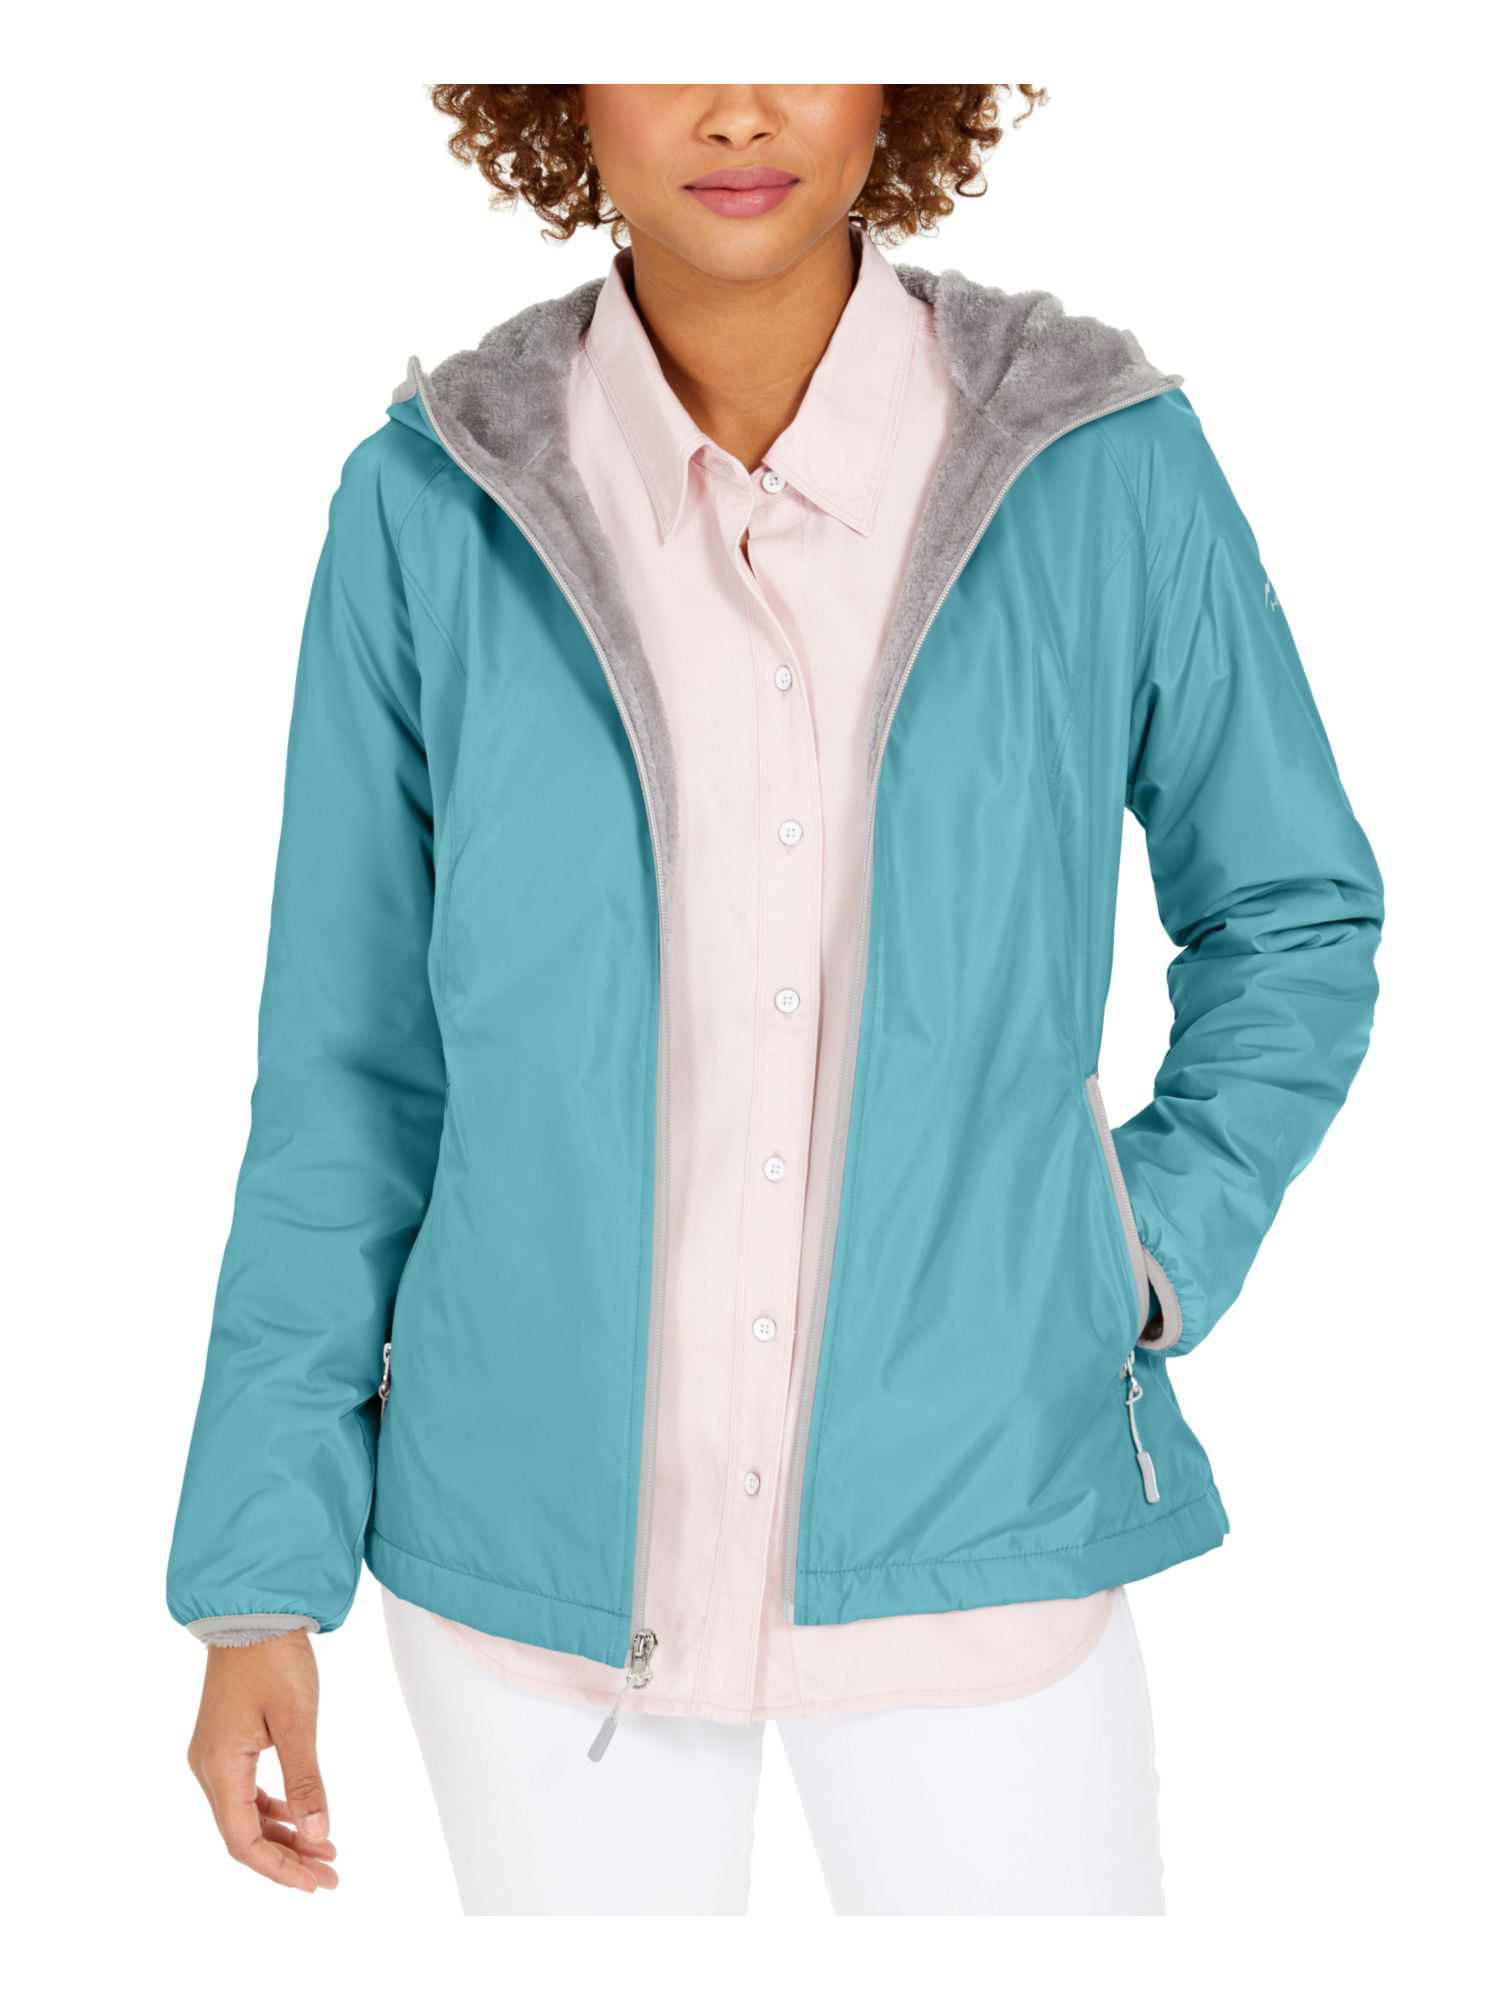 HFX Womens Quilted Cozy Sherpa Lined Jacket 